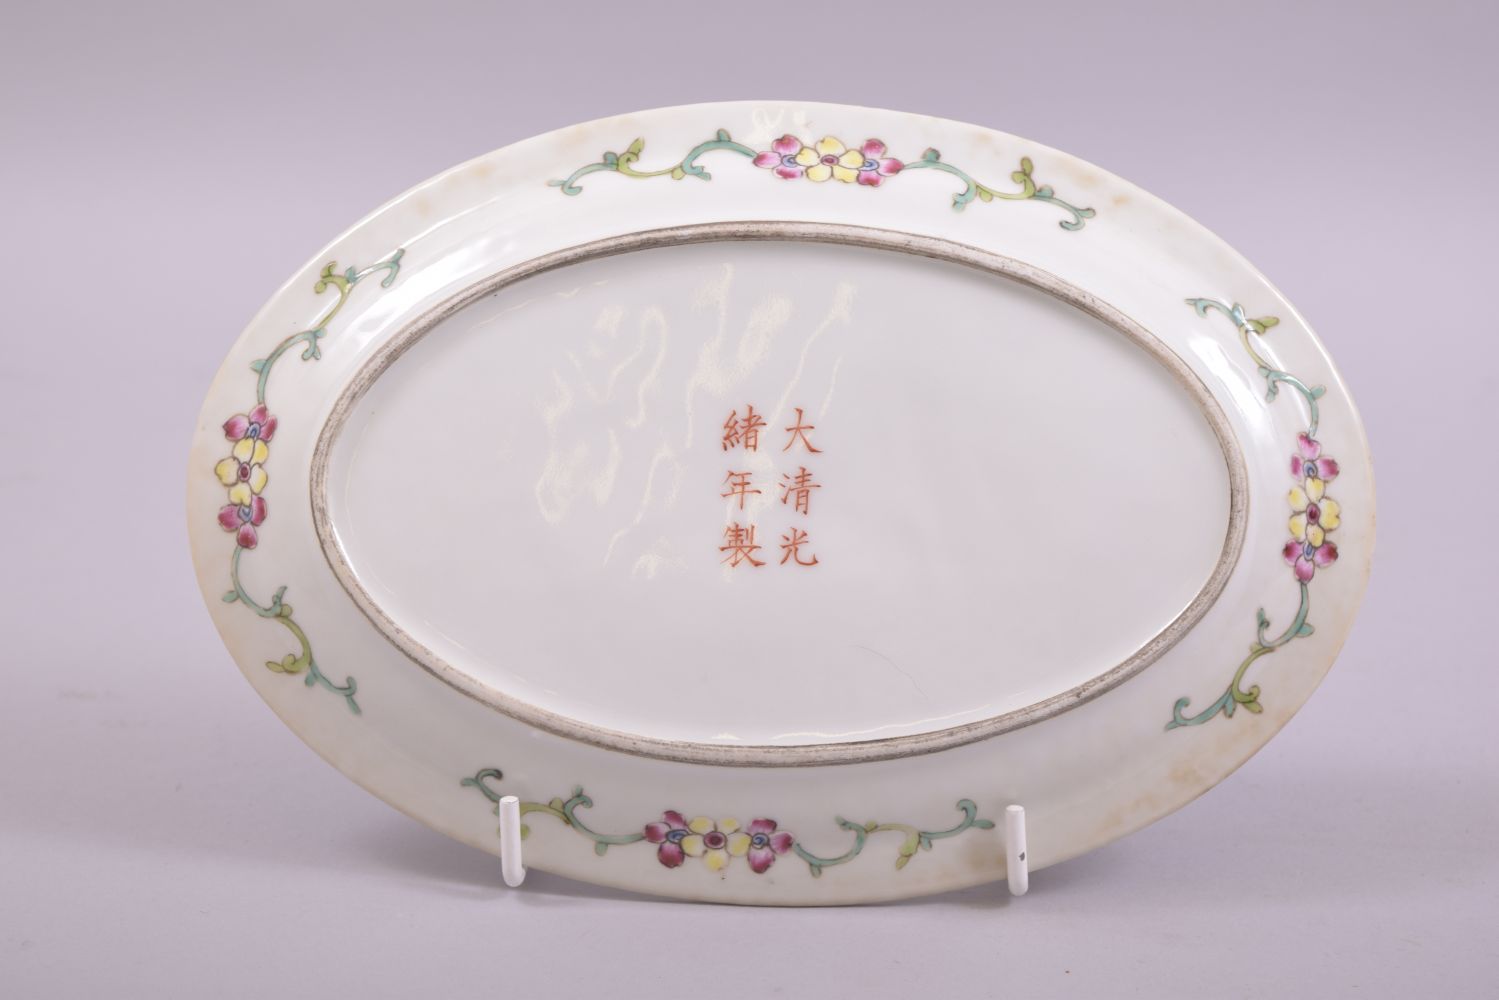 A CHINESE FAMILLE VERTE OVAL SHAPED PORCELAIN DISH, painted with birds and flora, six character mark - Image 2 of 3